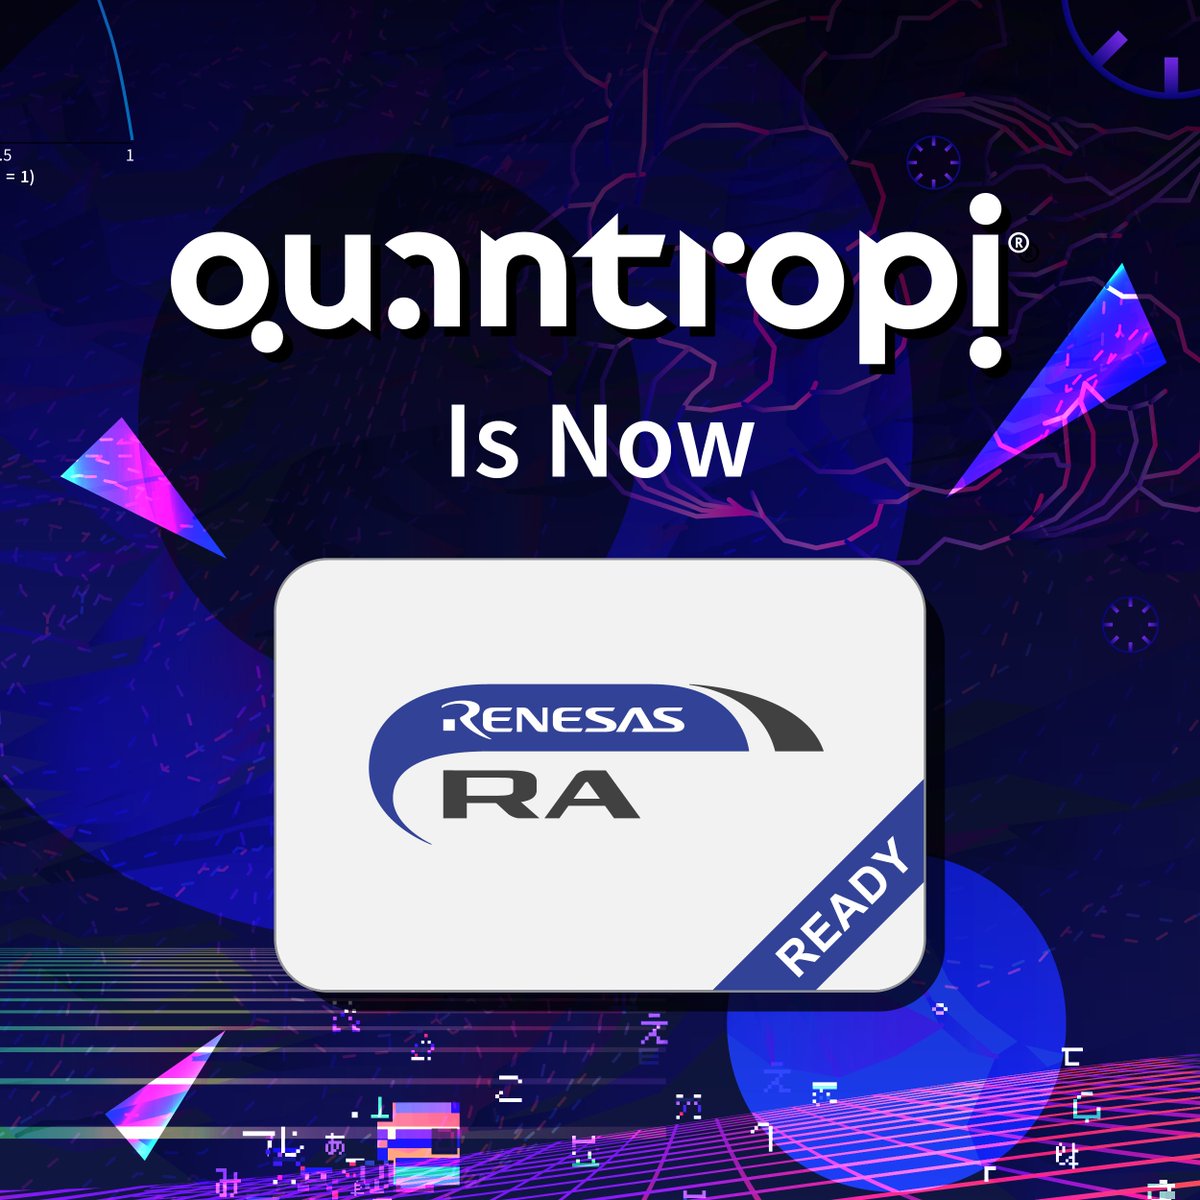 @Quantropi  is thrilled to announce our new partnership with @RenesasGlobal. Our QiSpace™ for IoT solutions – Application Security, Quantum TLS (TLS-Q), and uloadXLQ Secure Boot and Installer – are now successfully uploaded on the Renesas Ready Partner Network. #RenesasReady